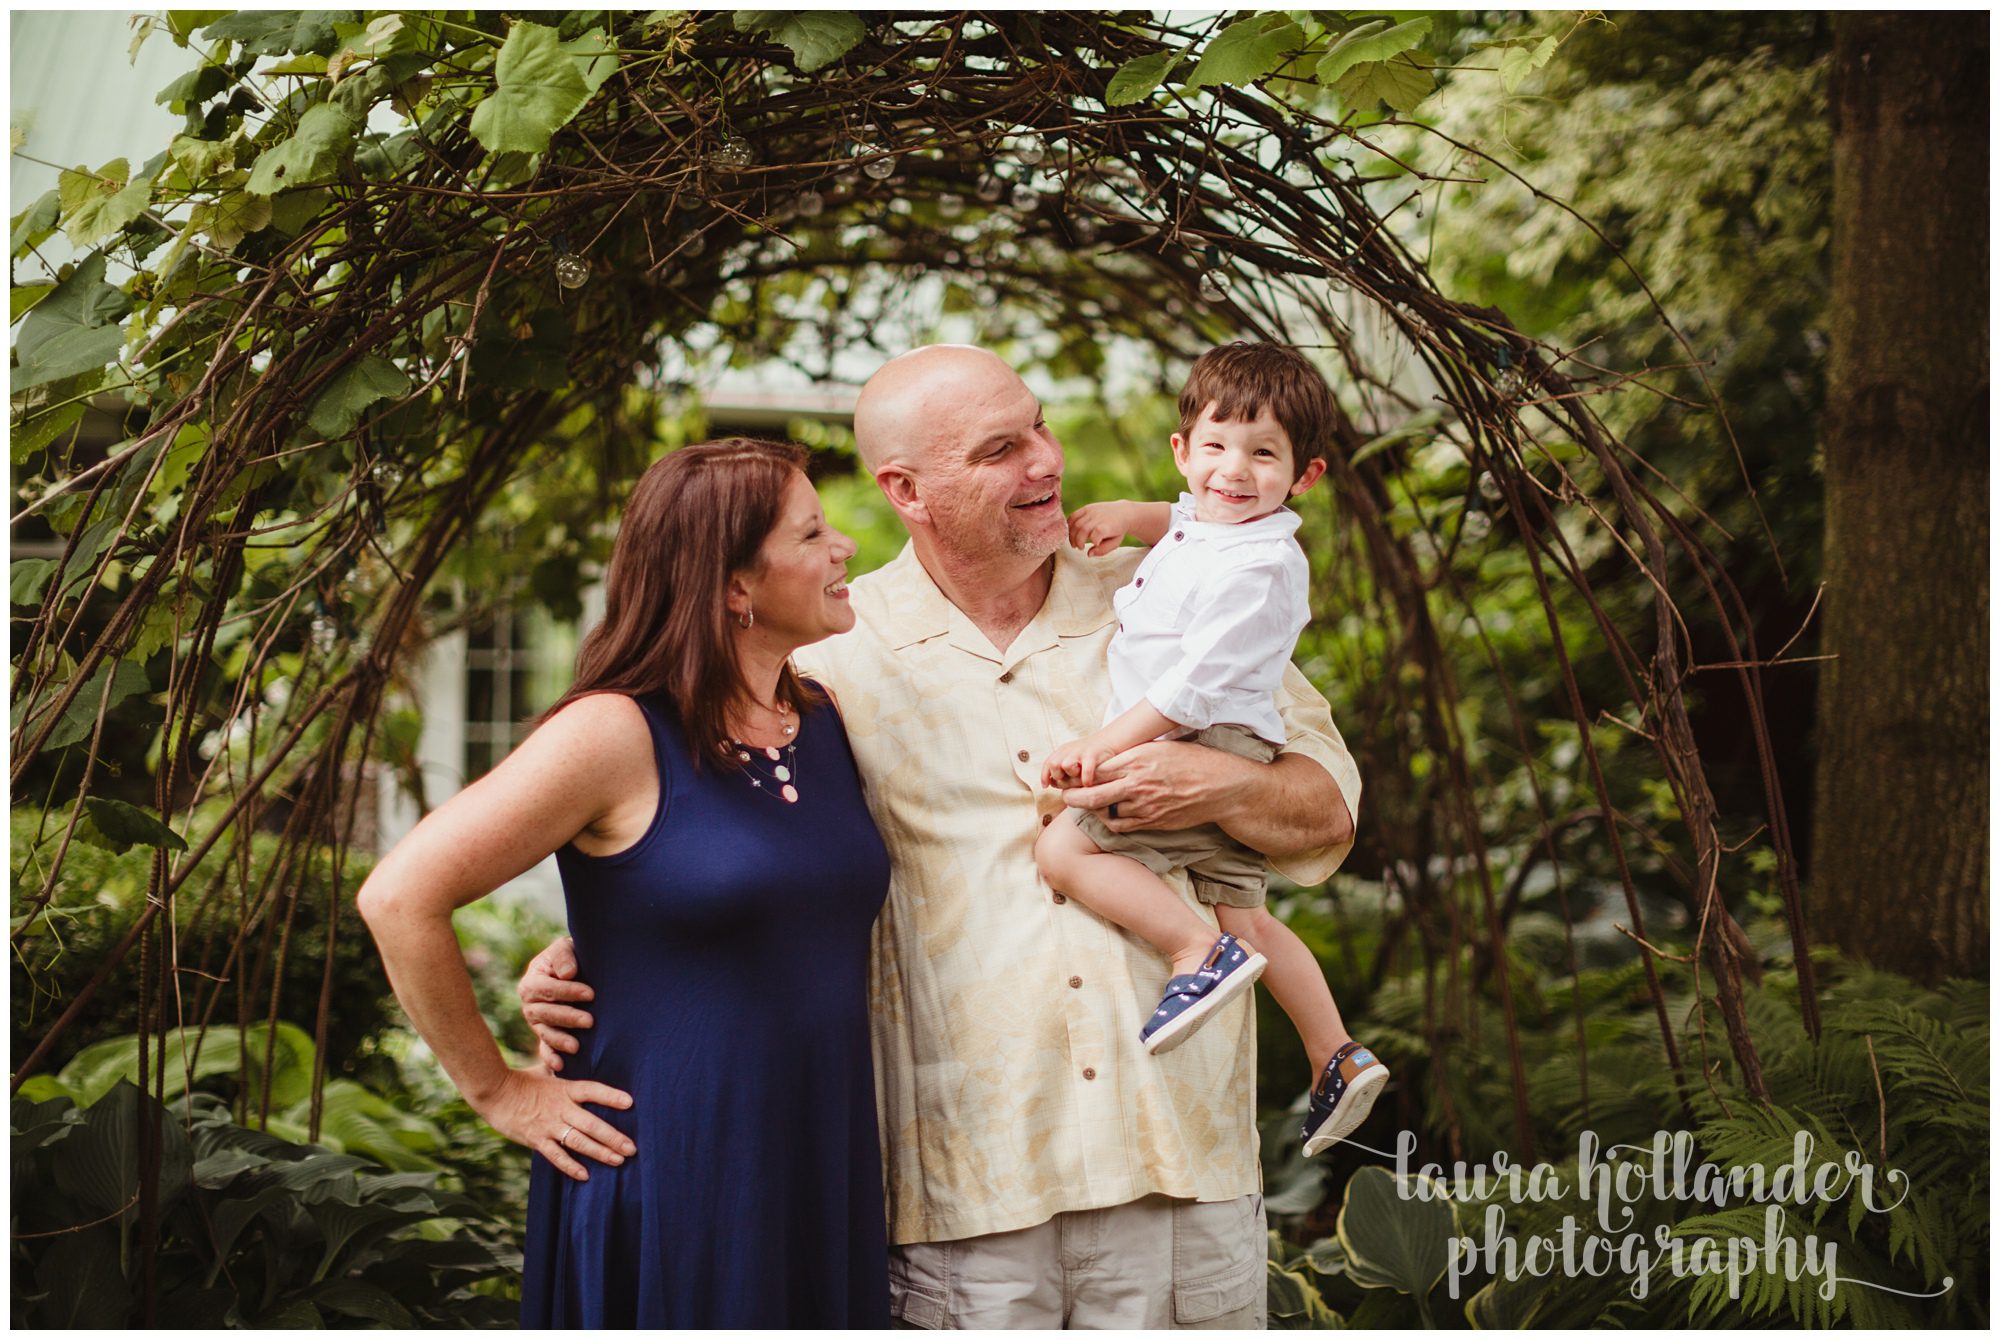 two year old garden session in Battle Creek MI with Laura Hollander Photography